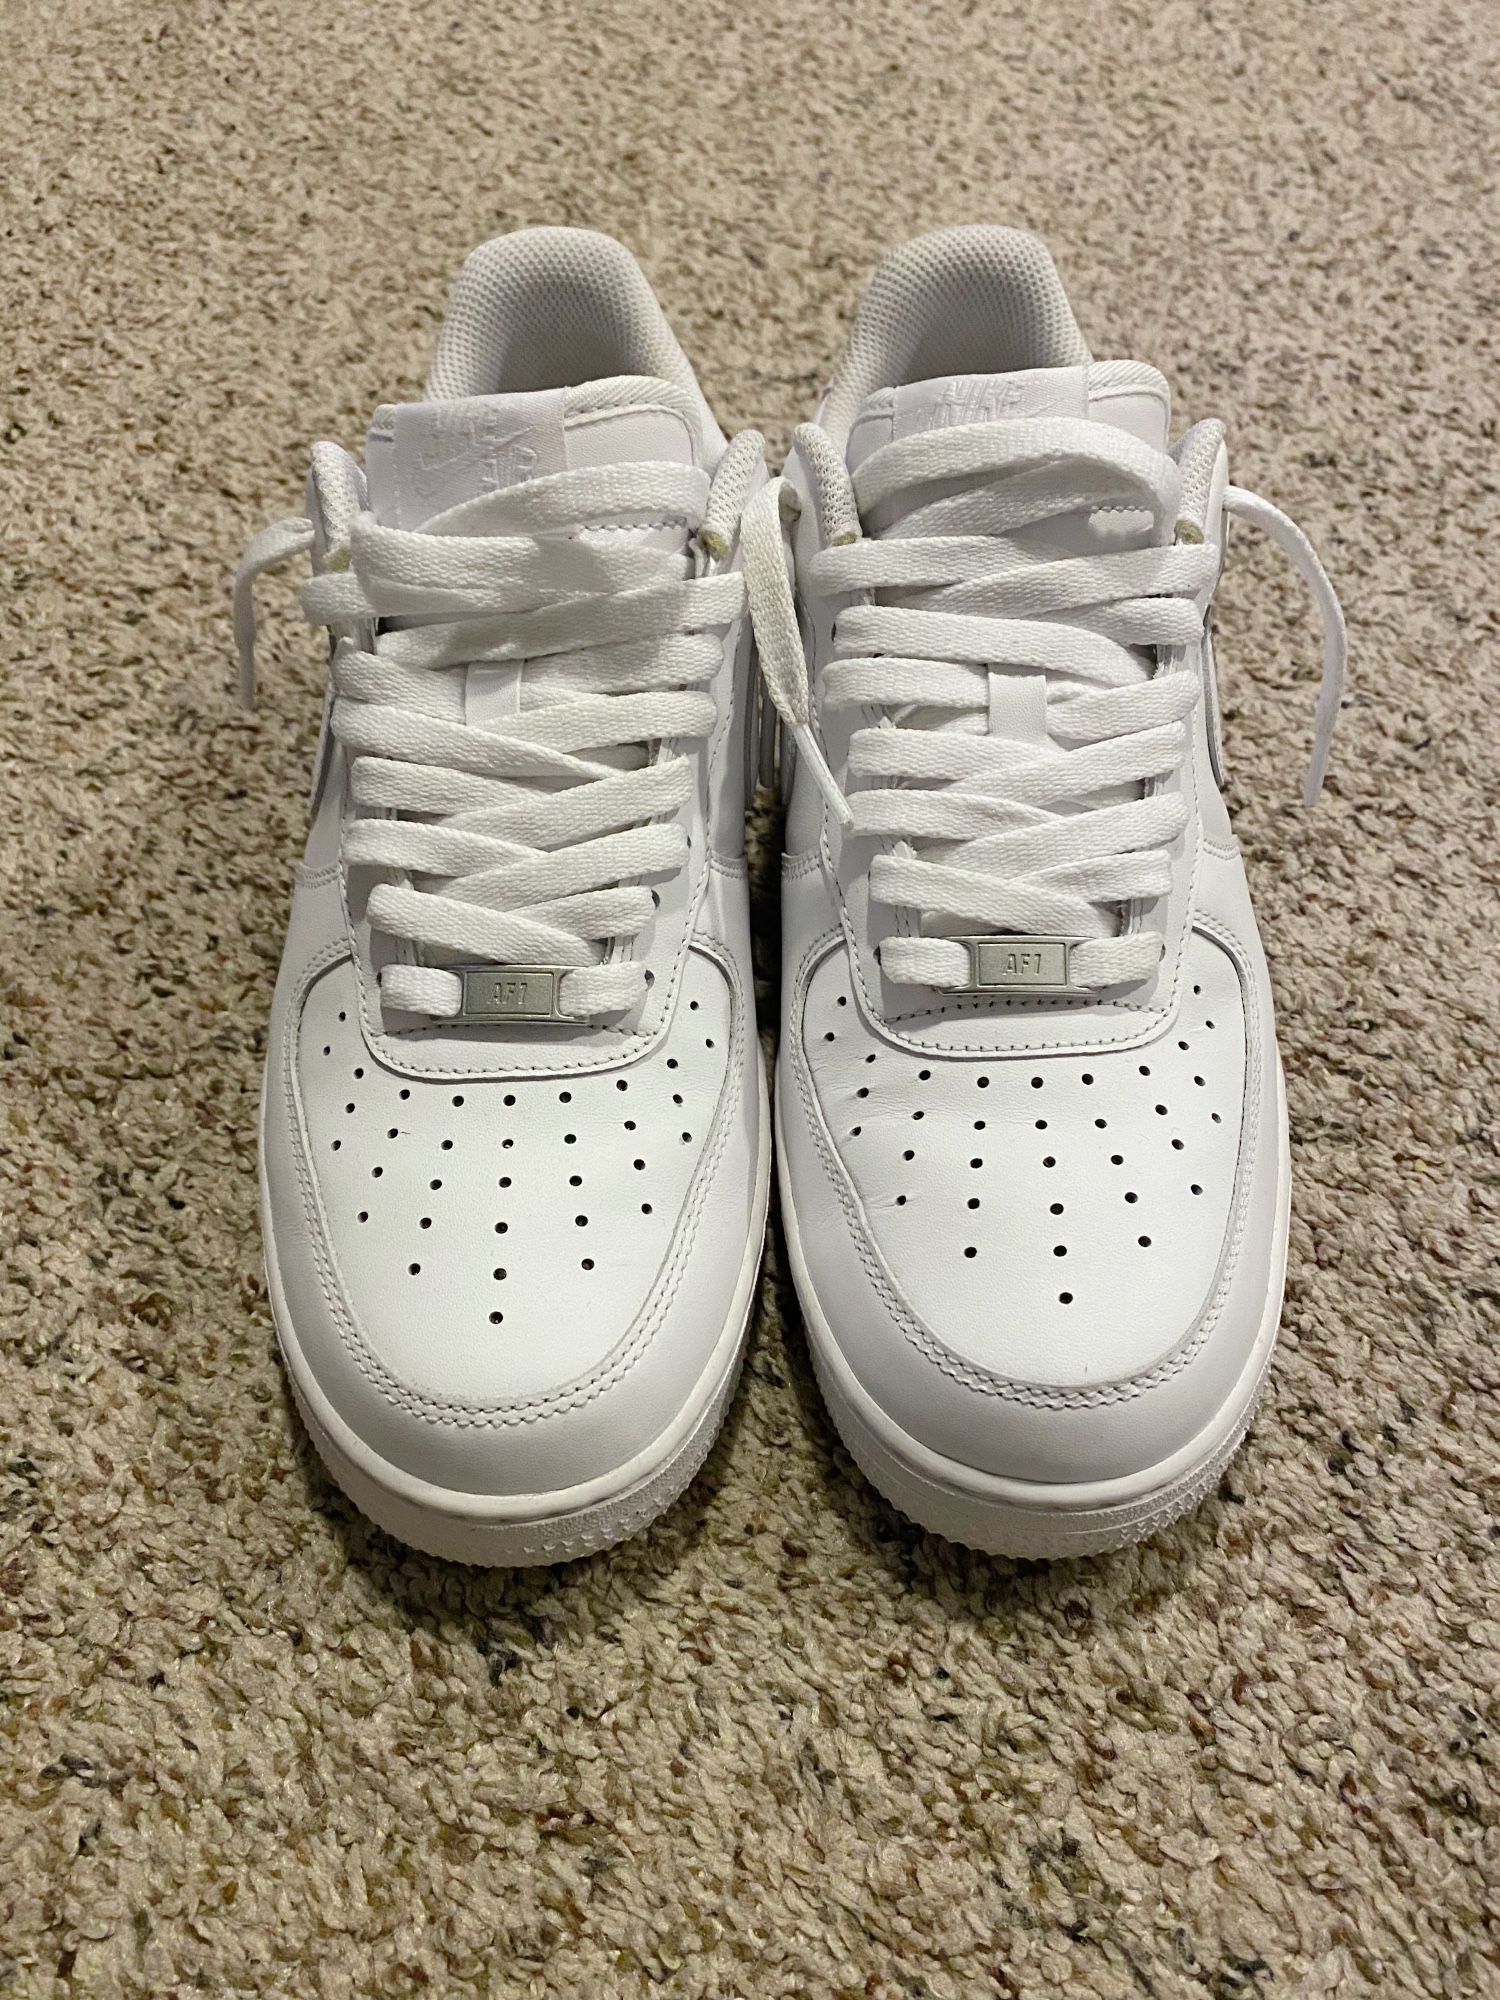 Nike Air Force 1 (Size 8.5 Men’s)